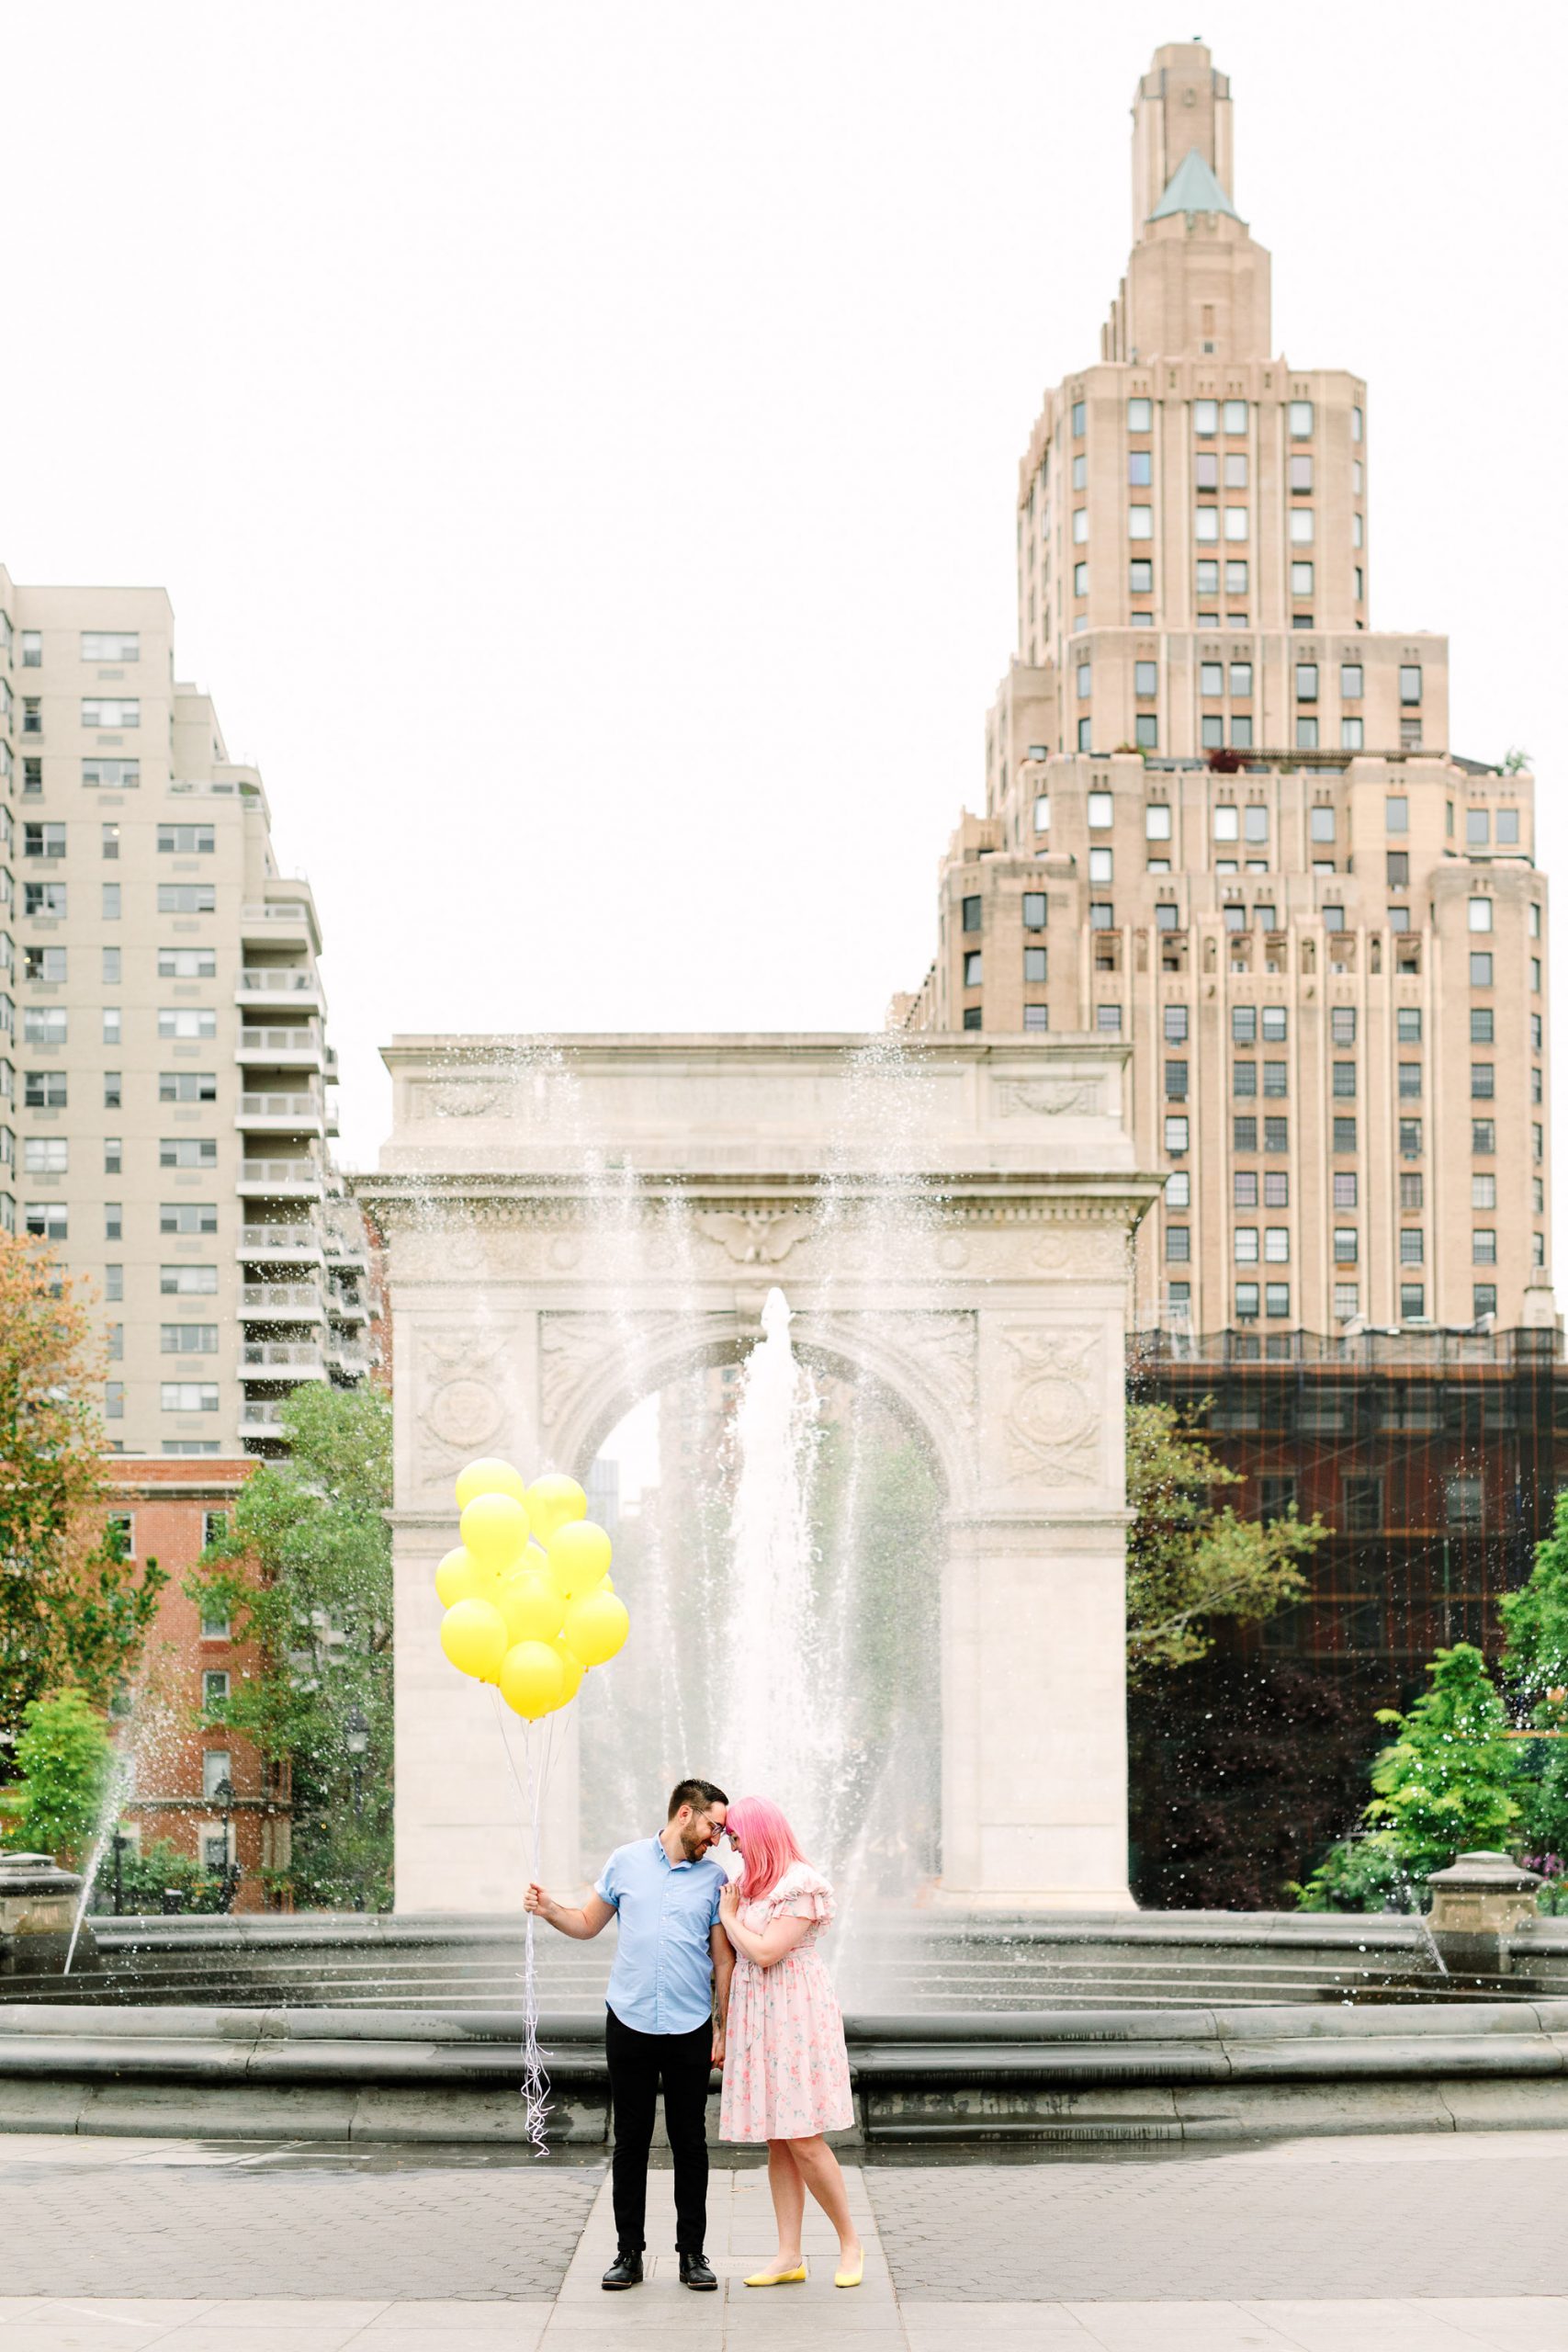 Engagement session at Washington Square Park by Mary Costa Photography